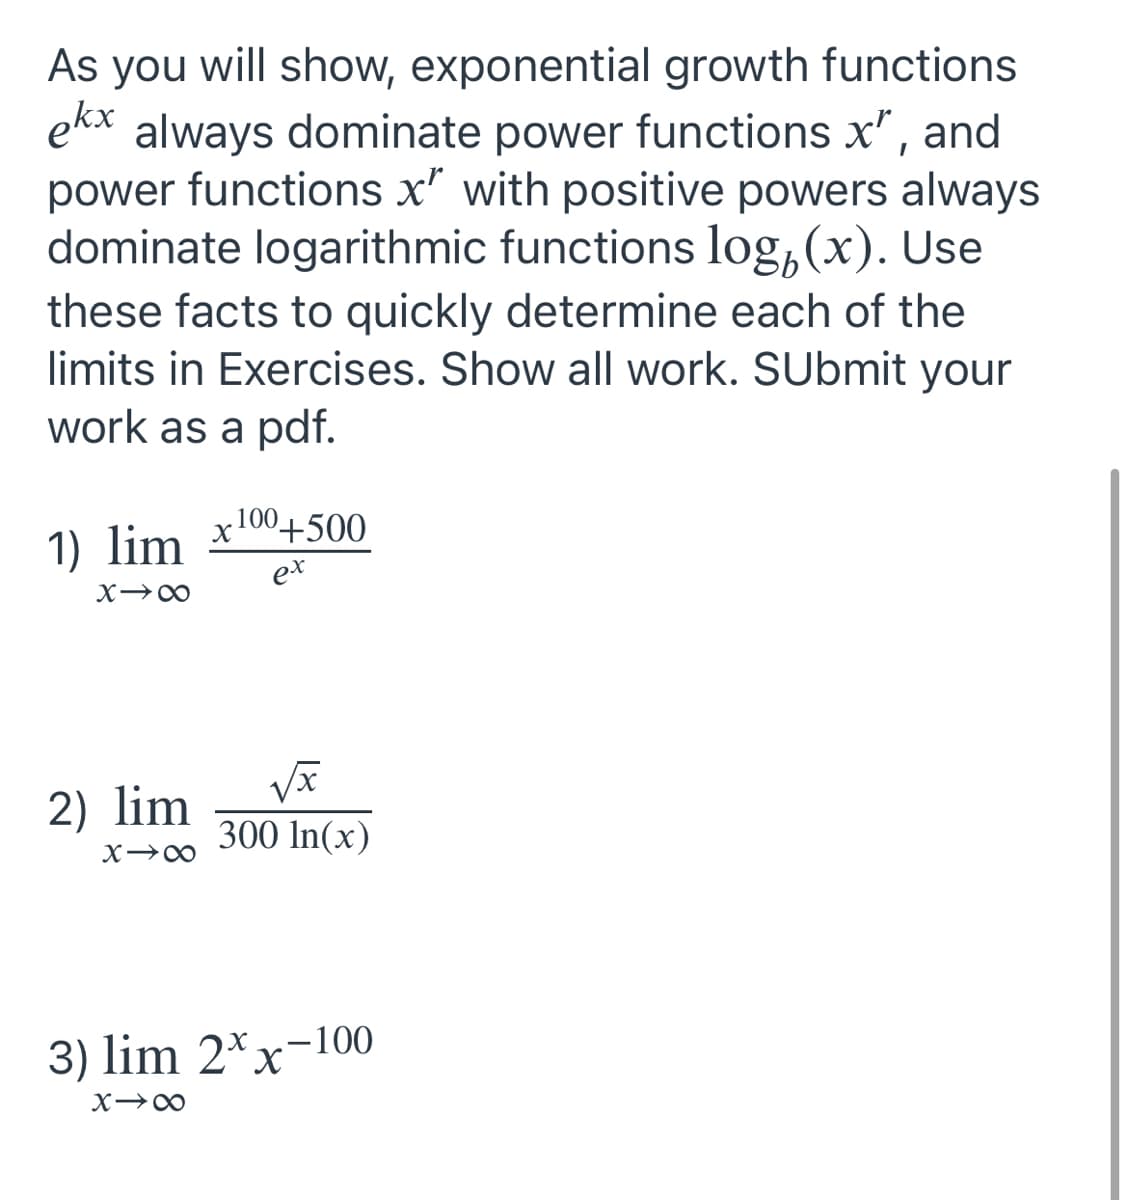 As you will show, exponential growth functions
ekx always dominate power functions x", and
power functions x" with positive powers always
dominate logarithmic functions log(x). Use
these facts to quickly determine each of the
limits in Exercises. Show all work. SUbmit your
work as a pdf.
100+500
1) lim
ex
818
2) lim
300 In(x)
X18
3) lim 2xx-100
81x